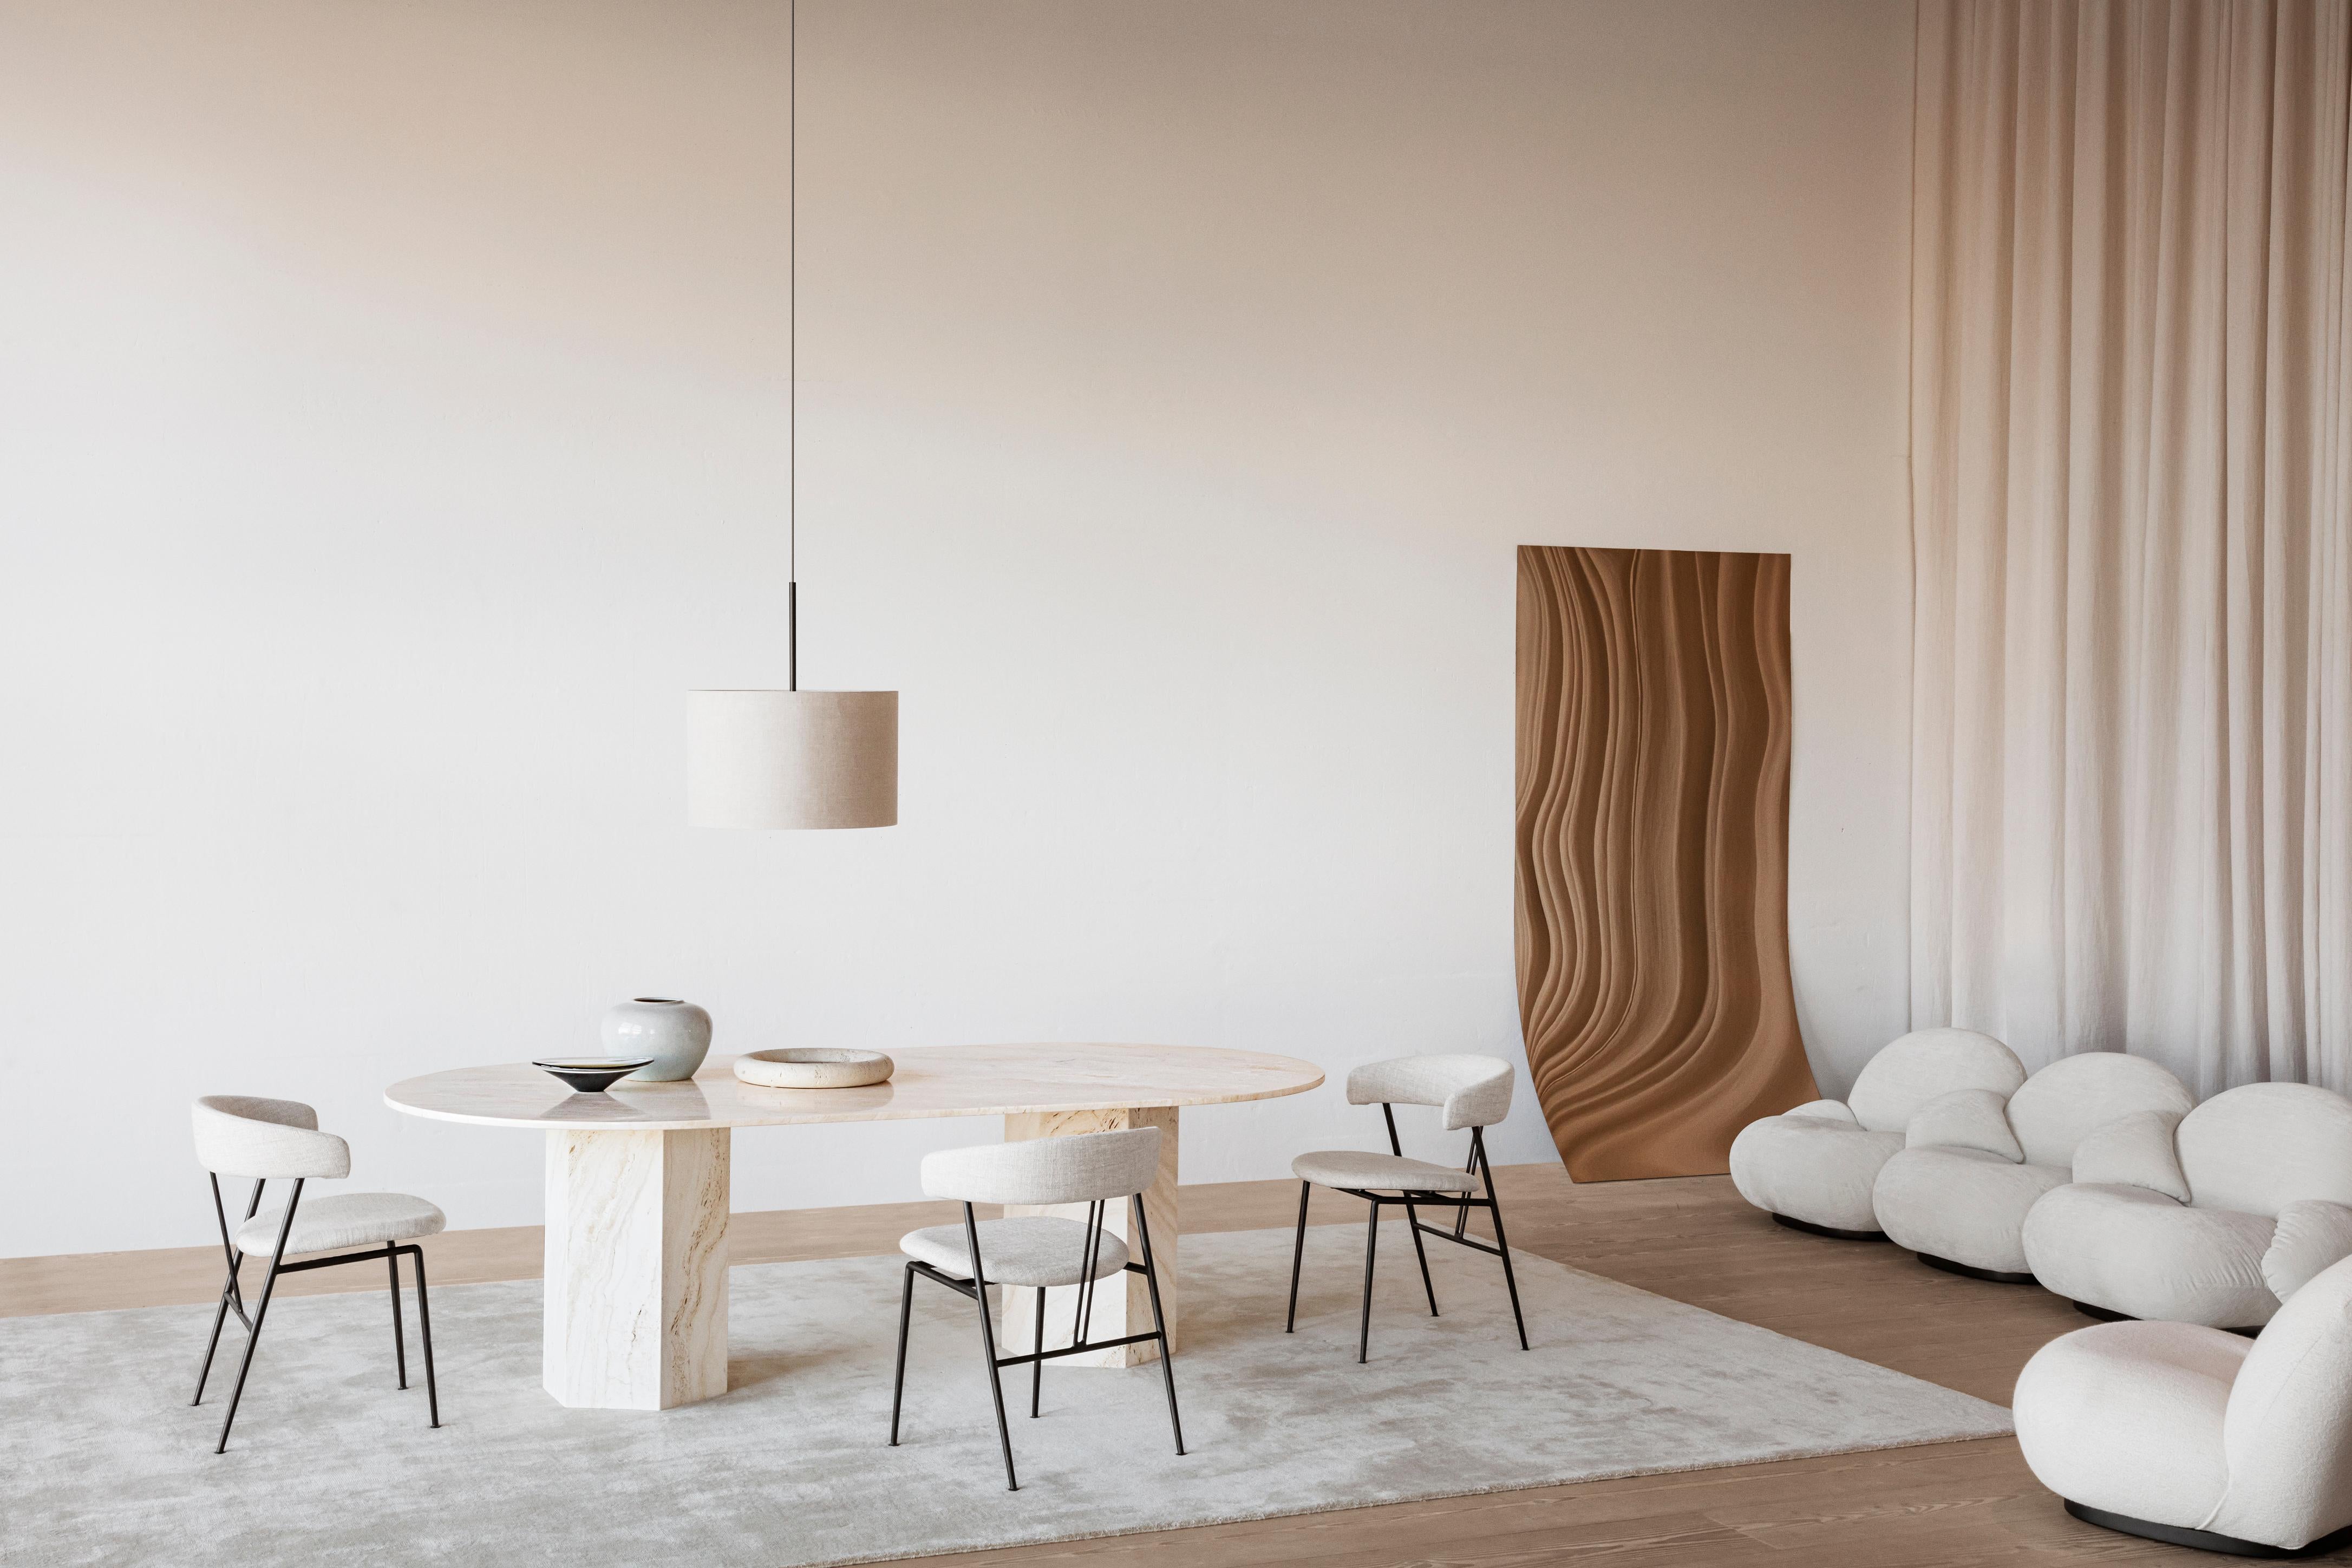 Elliptical Travertine epic table by GamFratesi for Gubi in Neutral white.

Named after the epic poems of ancient times, GamFratesi’s Epic Table for GUBI is a sculptural piece of furniture inspired by Greek columns and Roman architecture. Made in